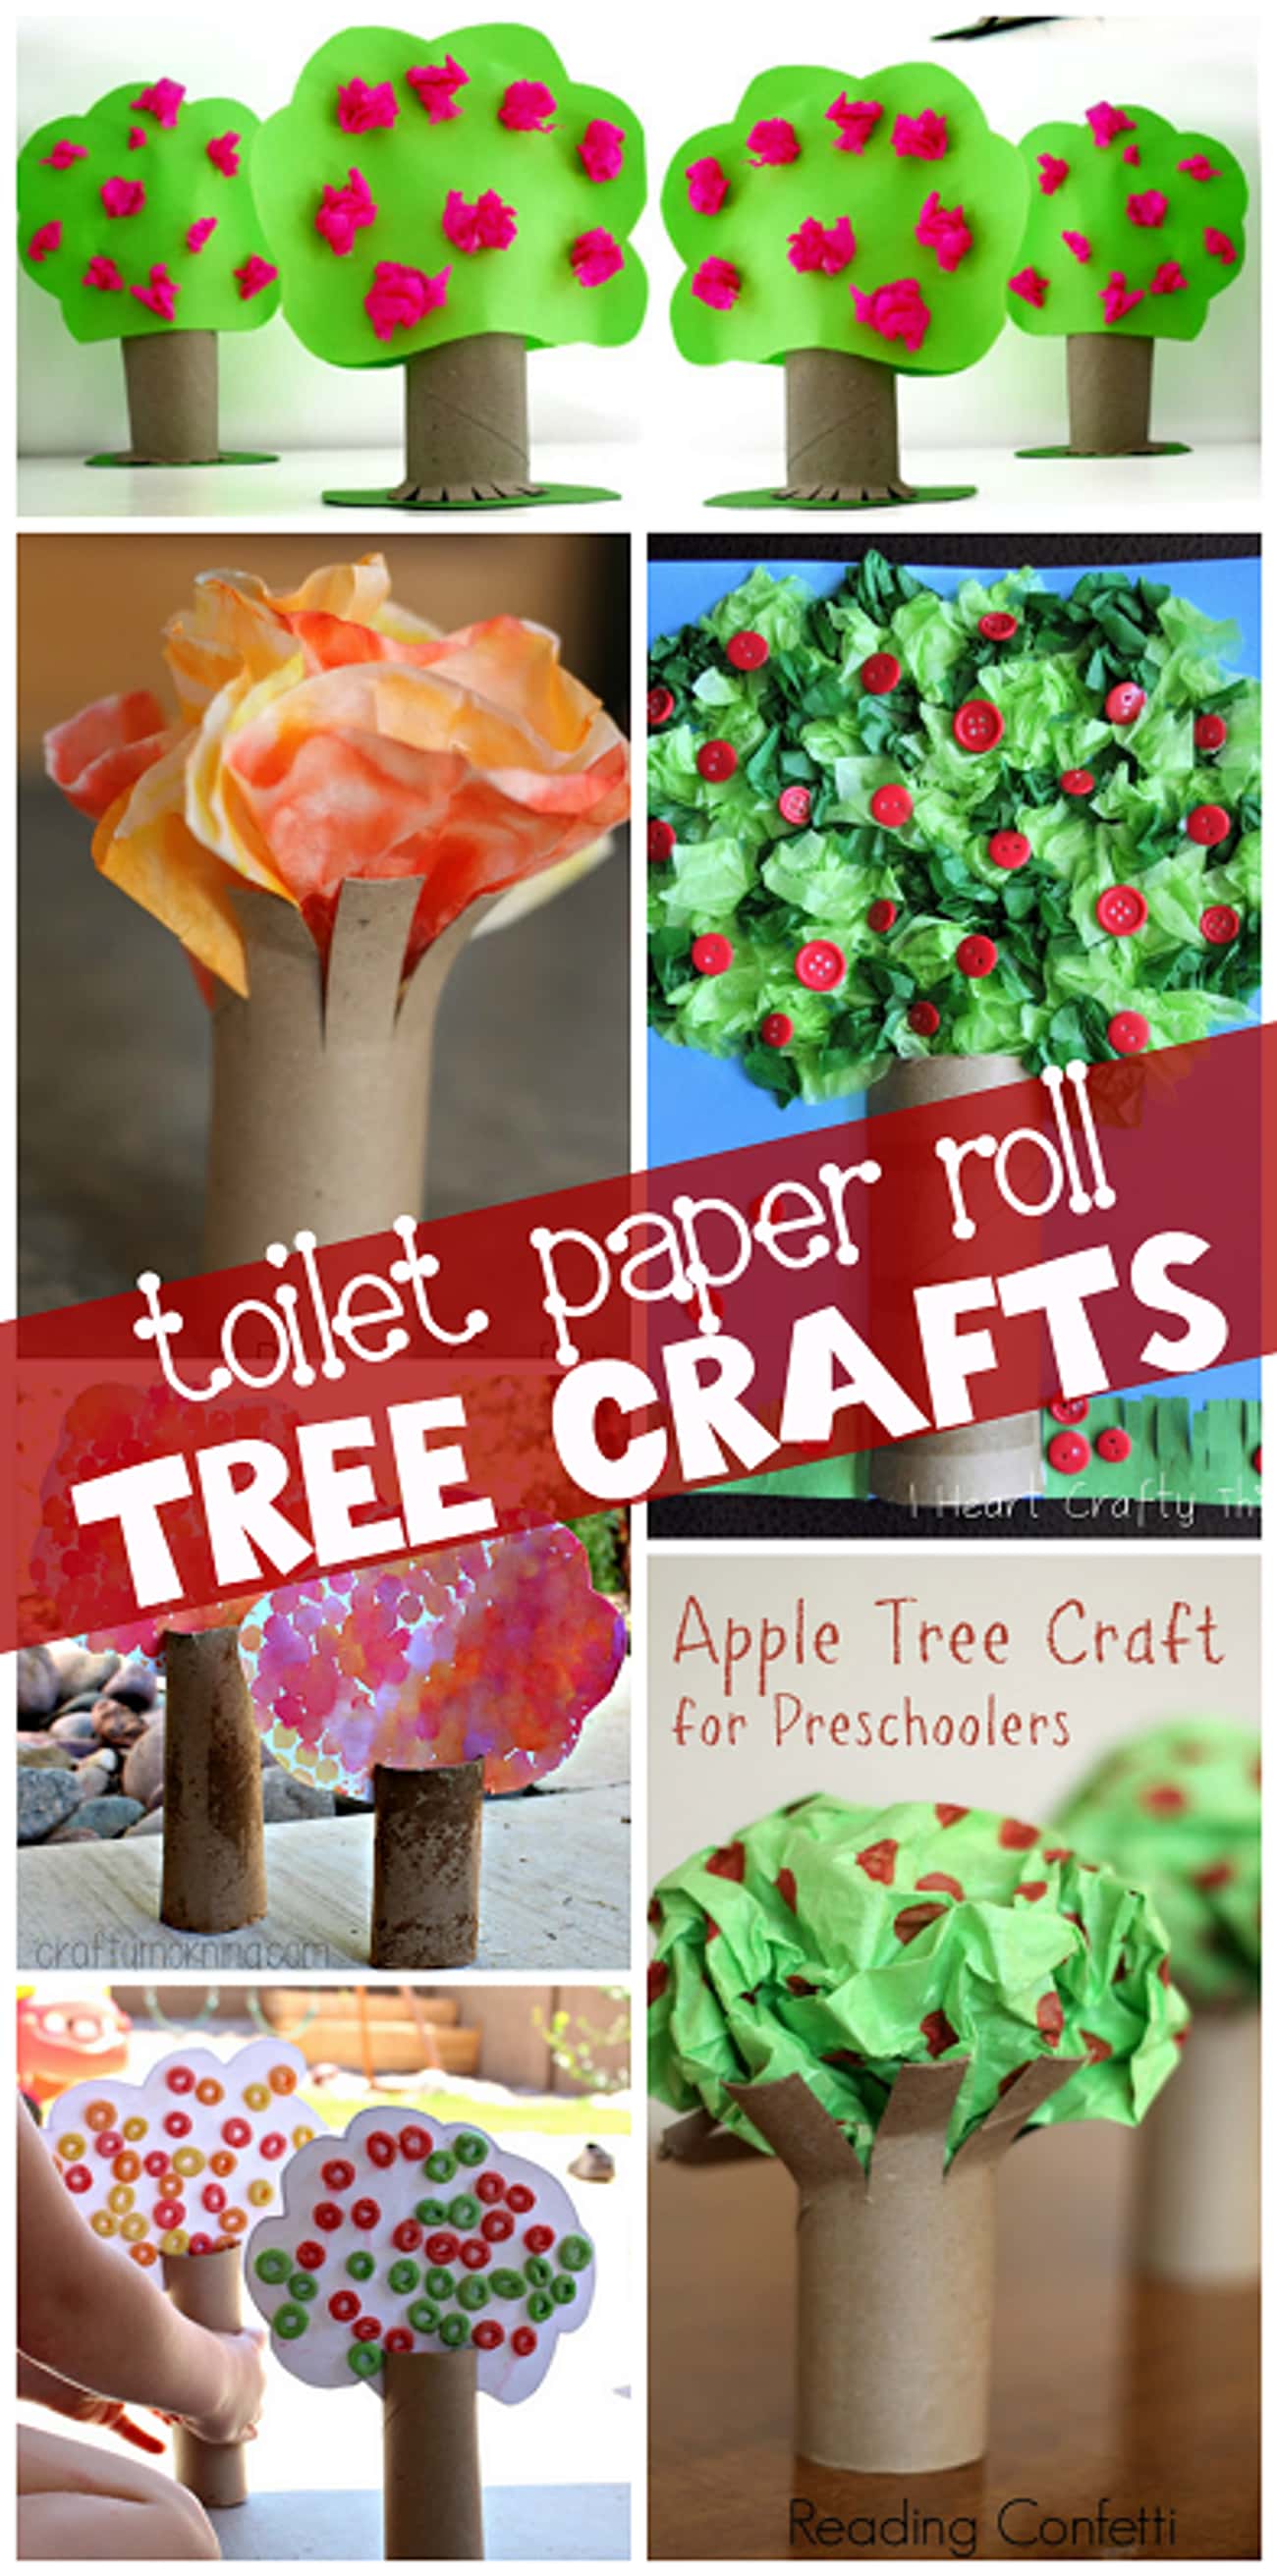 crafts-for-2-year-olds-craft-ideas-for-two-year-old-kids